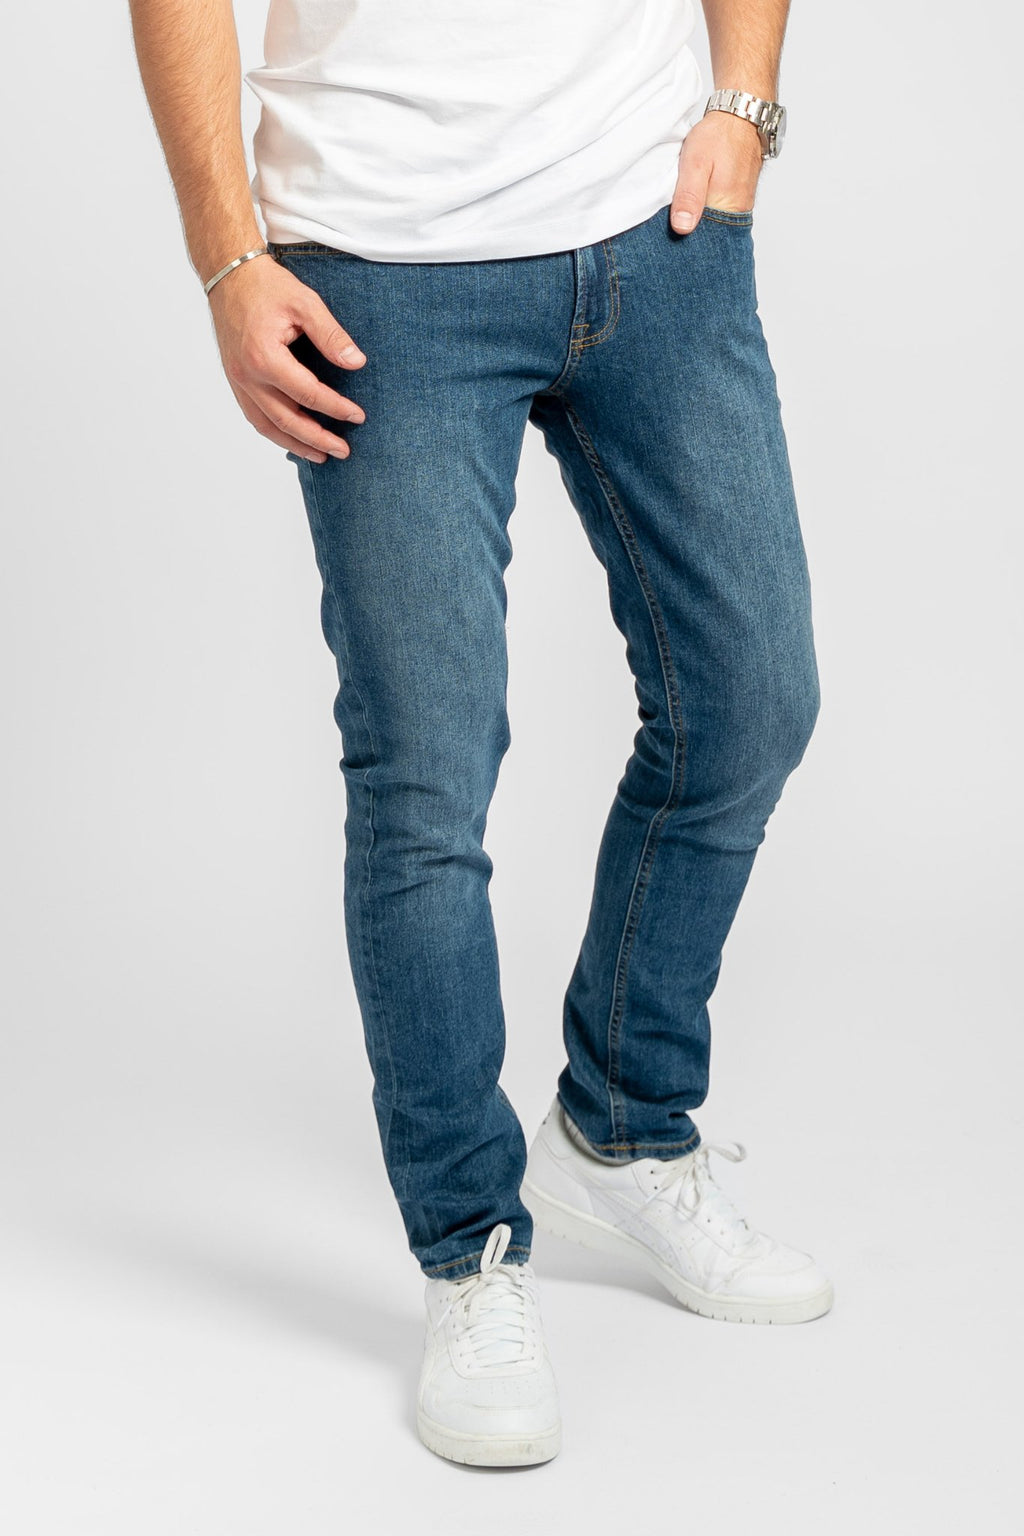 The Original Performance Jeans™️ (Slim) - Package Deal (2 pcs.) (email)